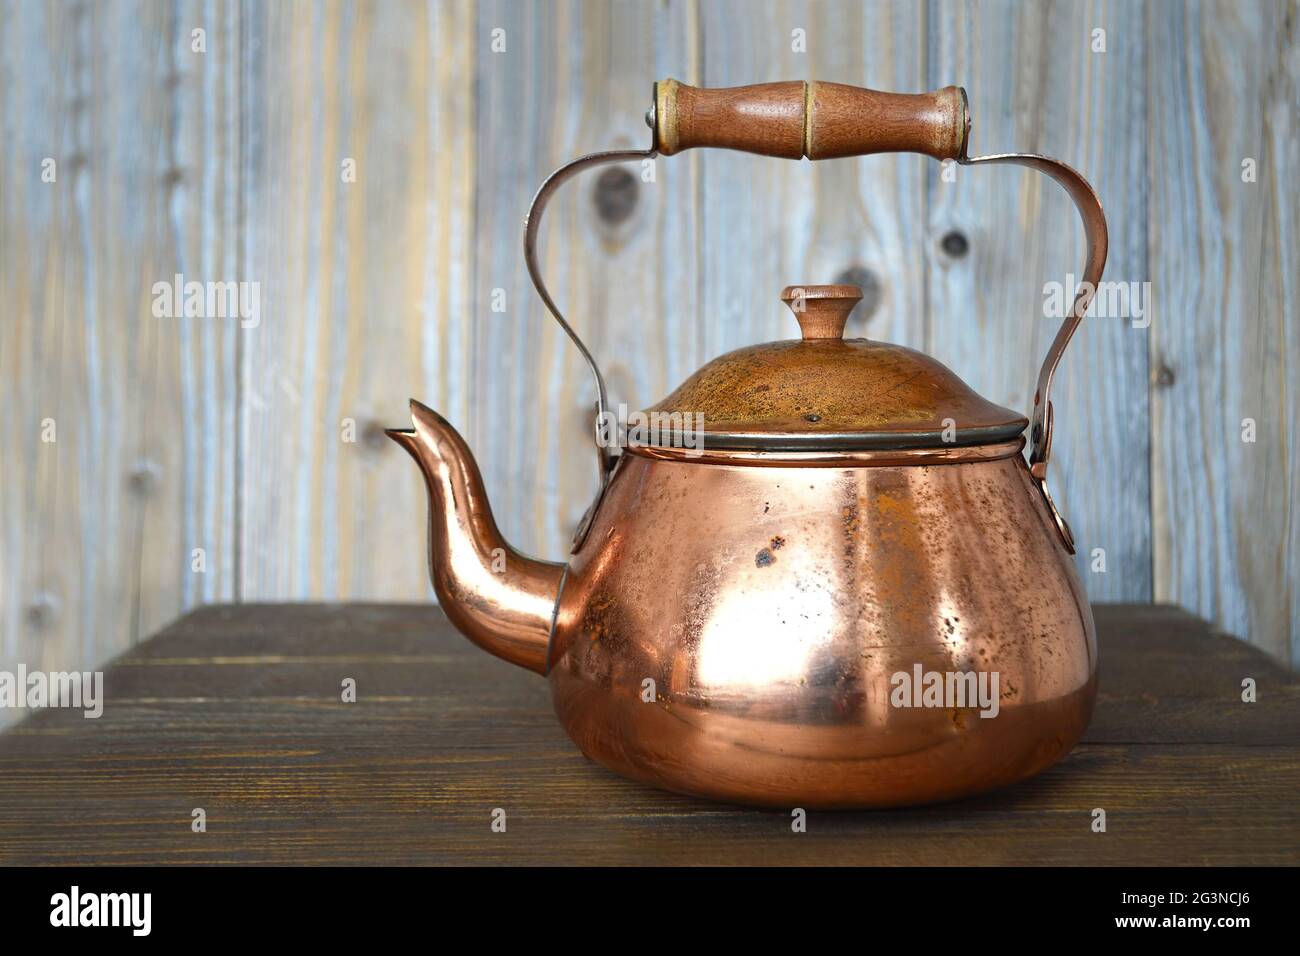 Old copper teapot on wooden background Stock Photo